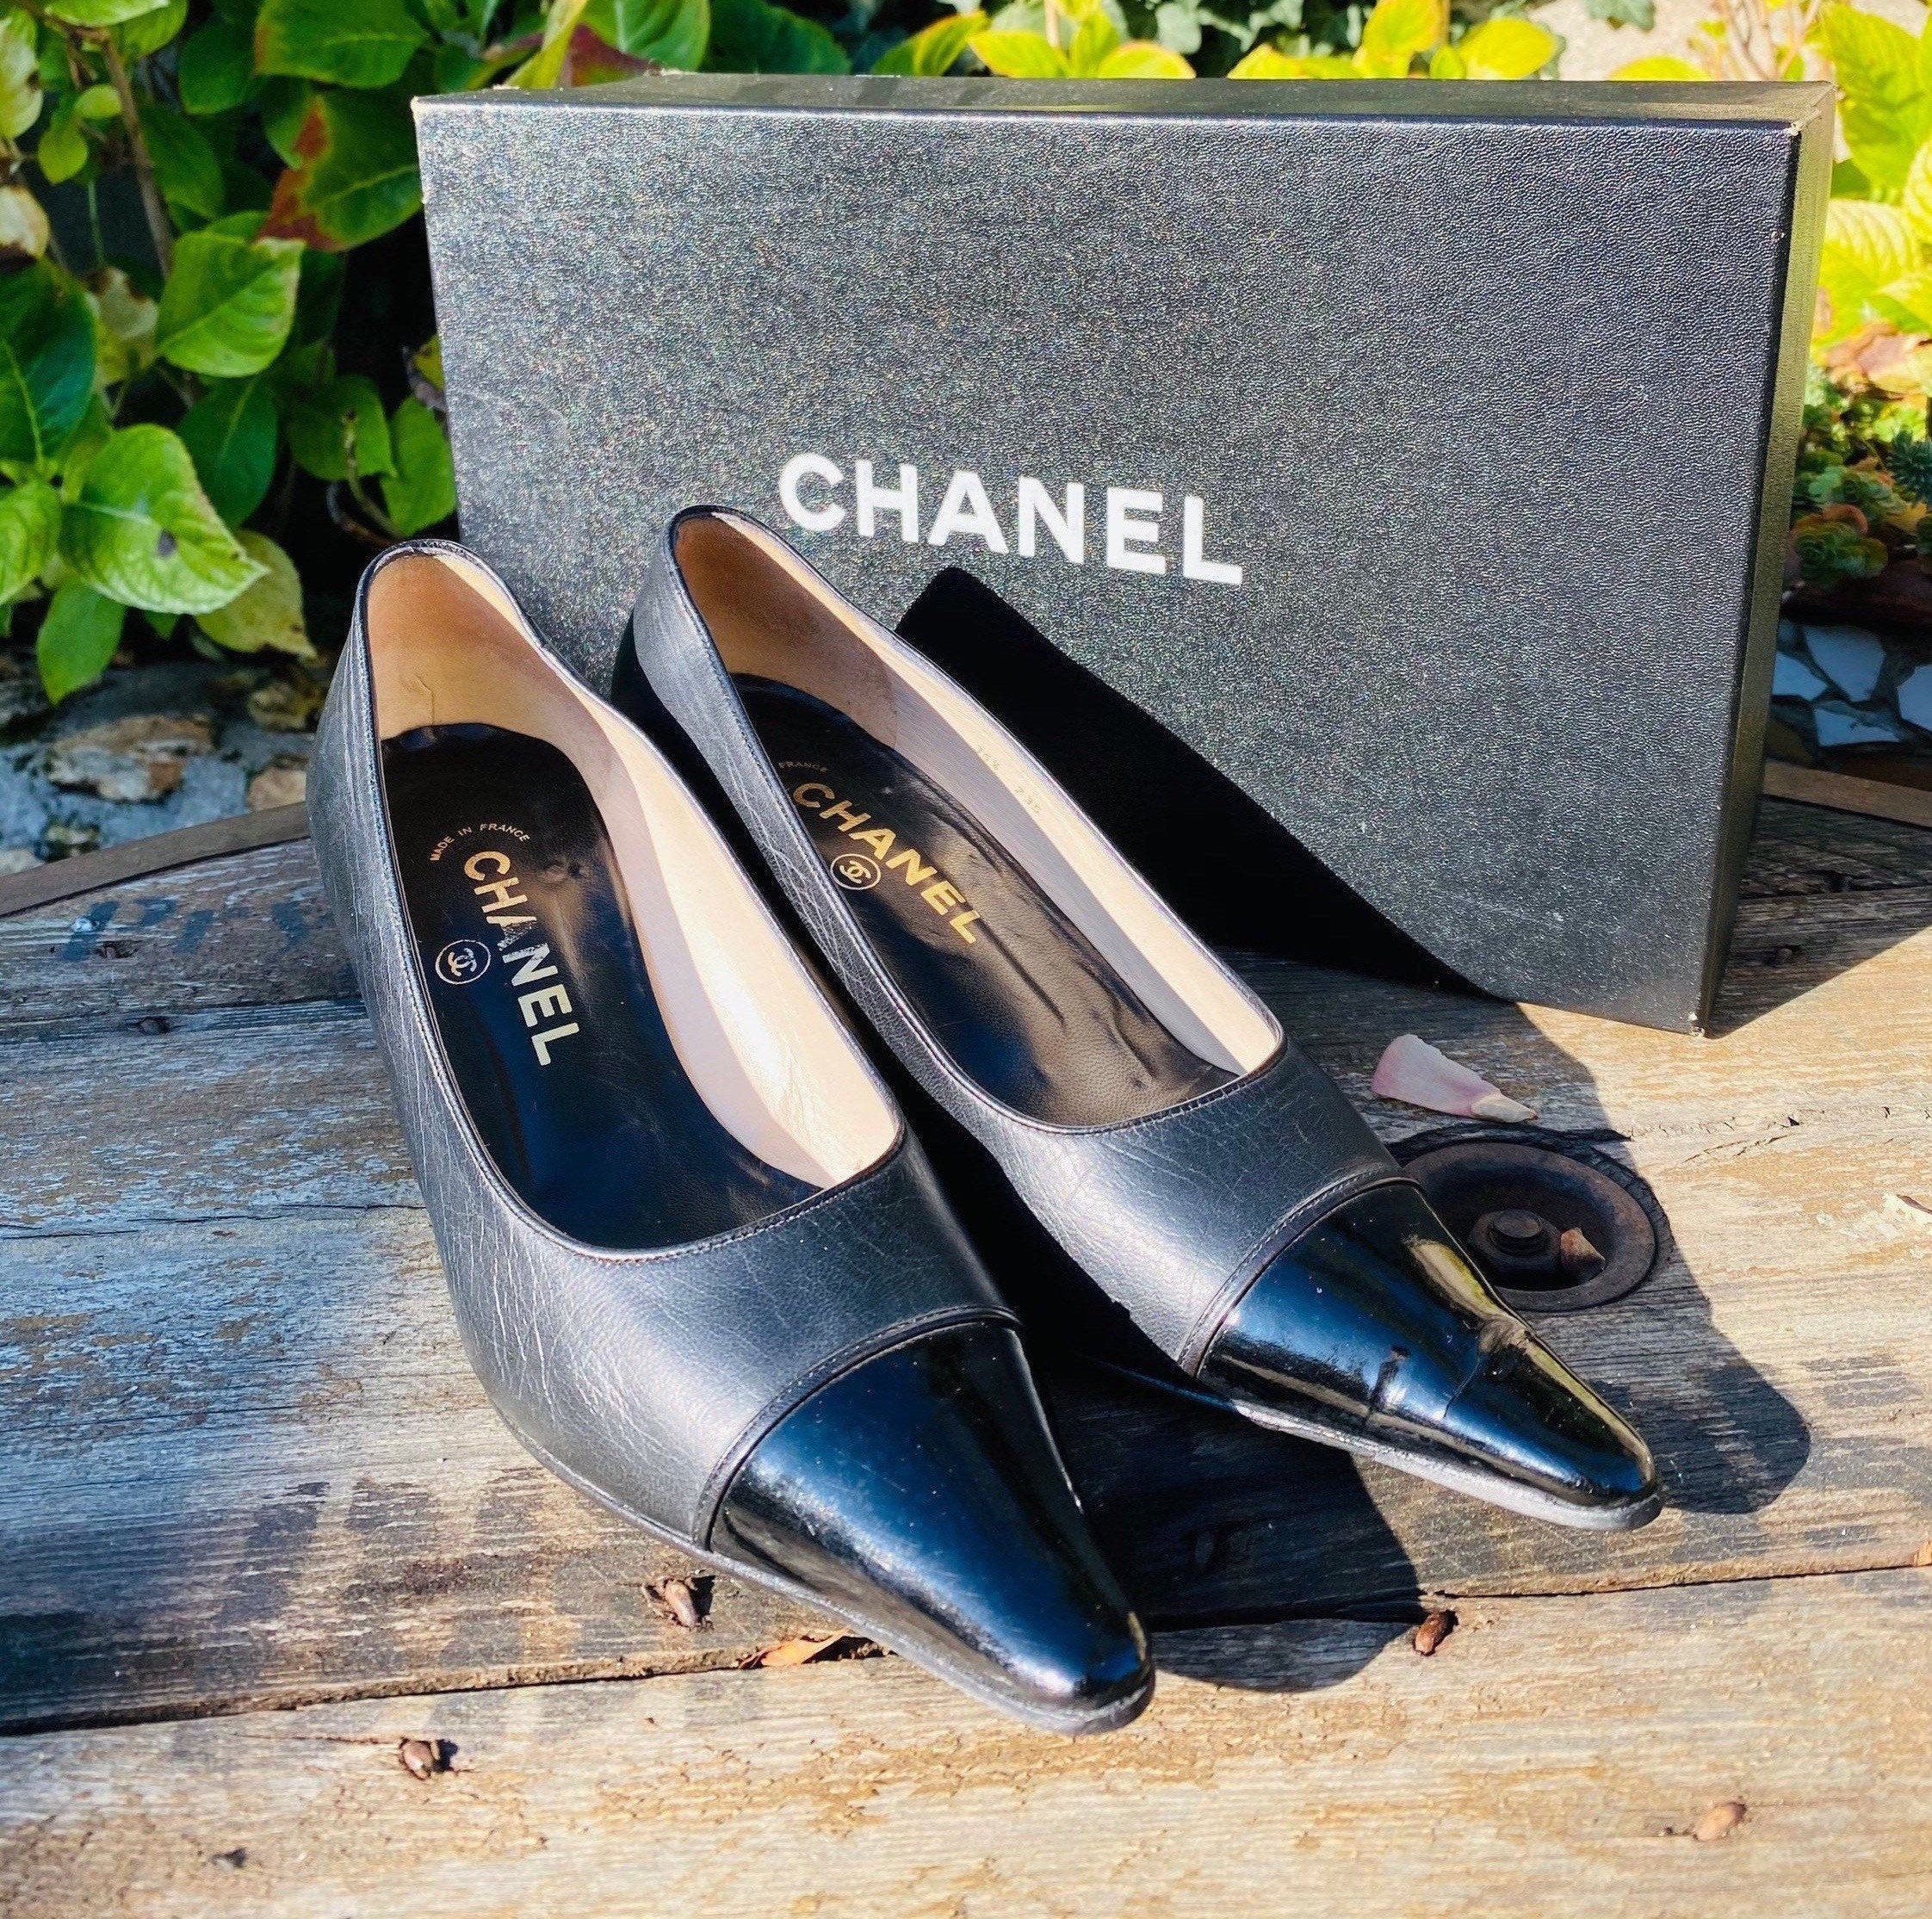 Chanel Shoes Heeled Kitten Waist Shoes Size 36 1/2 Two Tones - Etsy